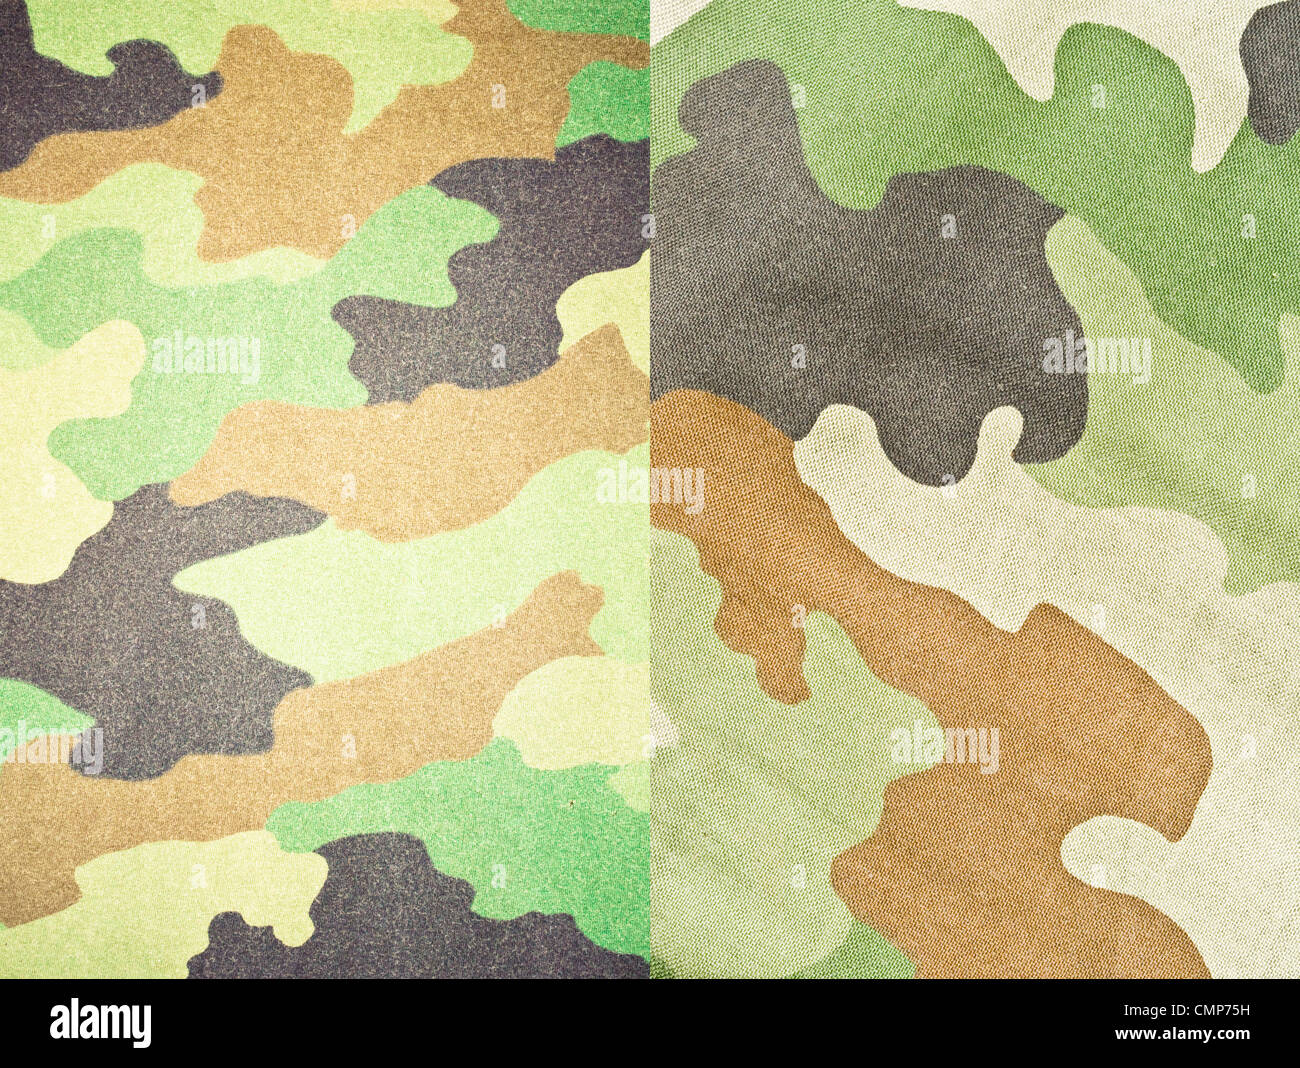 Set of army and military backgrounds and textures  Stock Photo